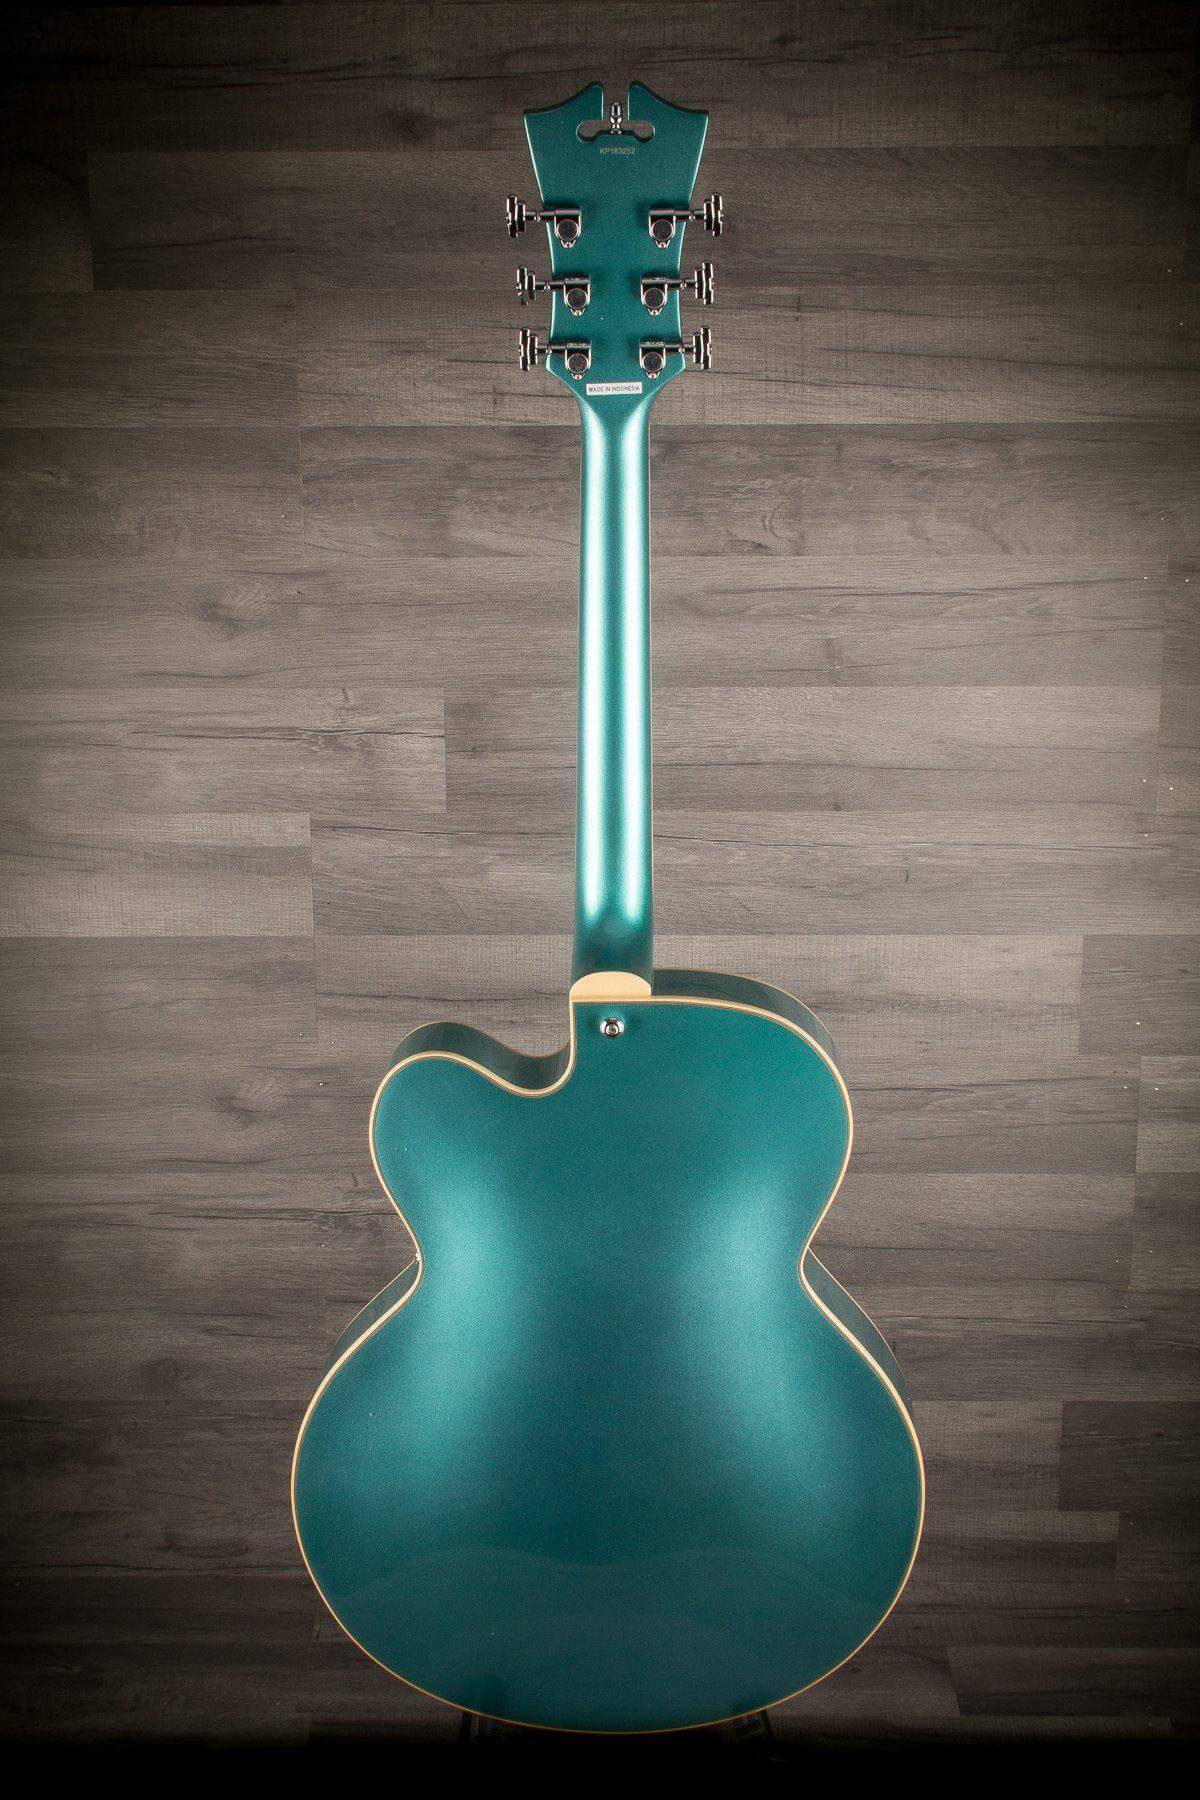 D'Angelico Electric Guitar D'Angelico Premier EXL-1 Ocean Turquoise